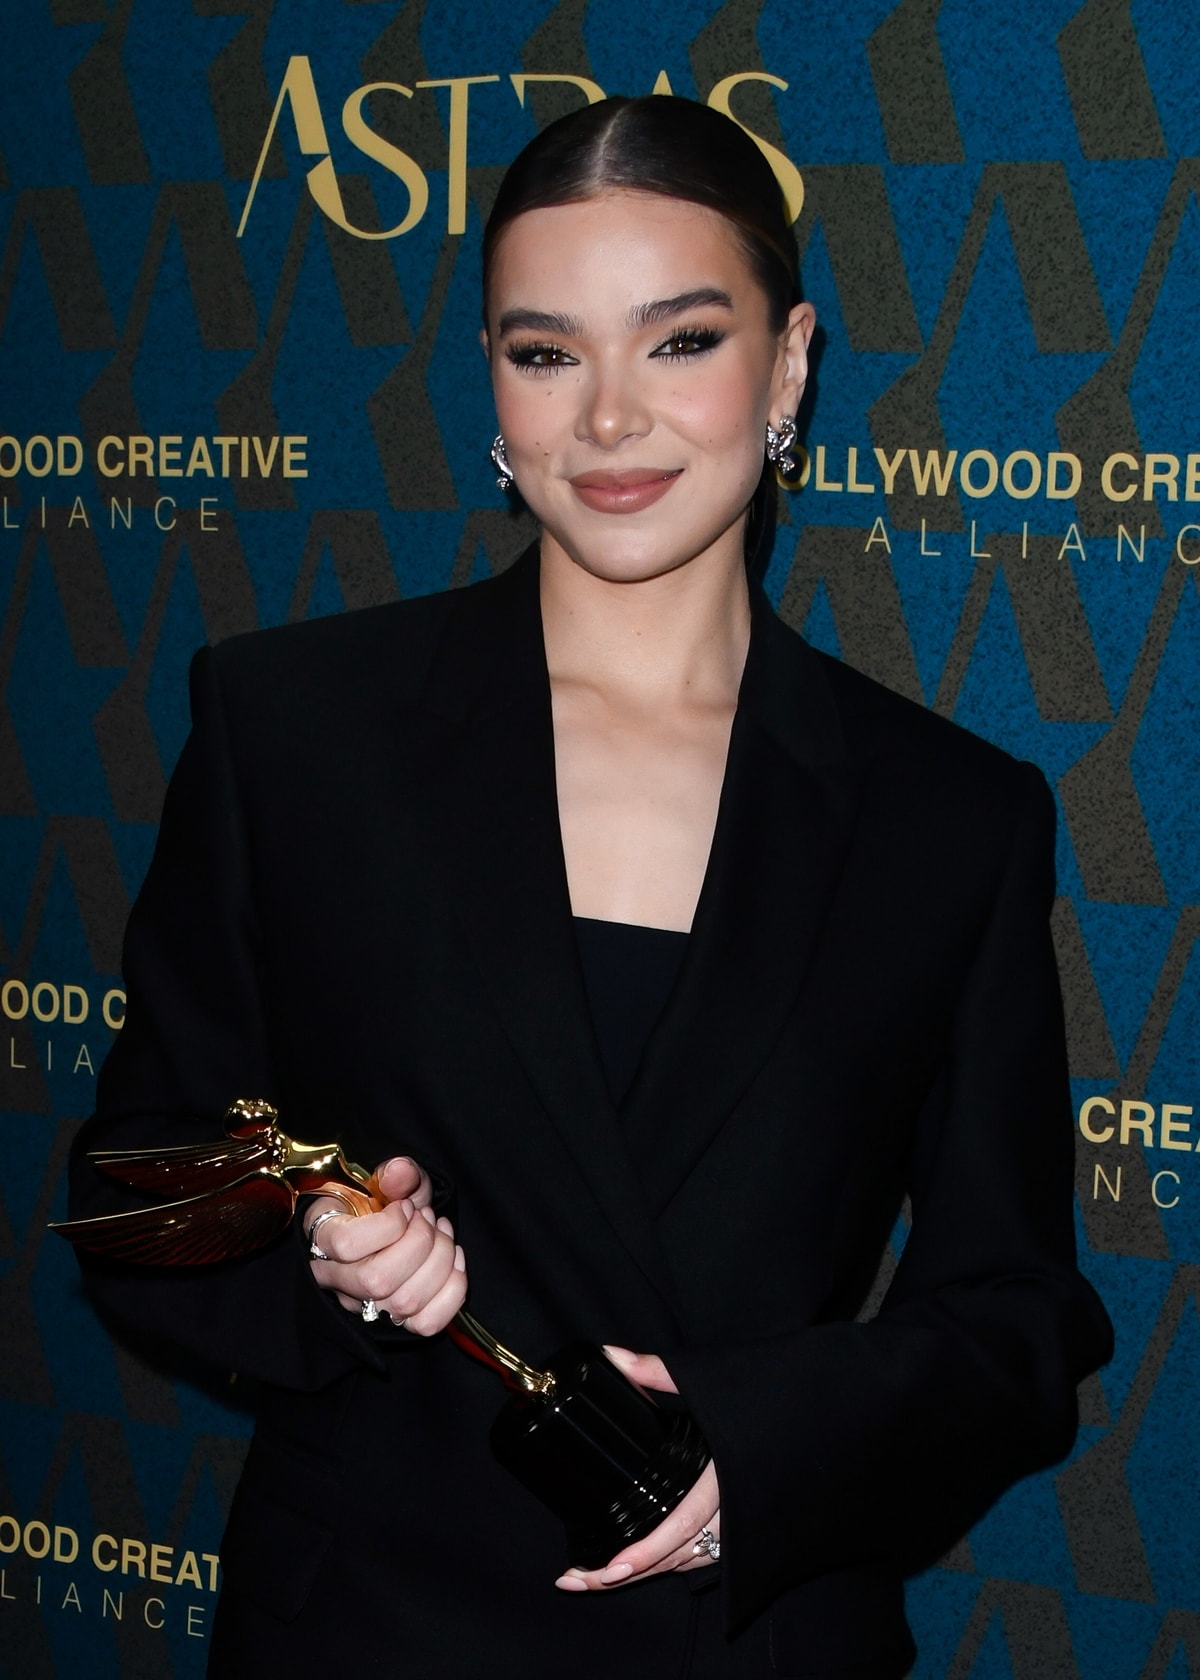 Hailee Steinfeld's makeup featured a nude lip, complemented by a middle-parted low updo adorned with a black silk bow, capturing a look of refined sophistication